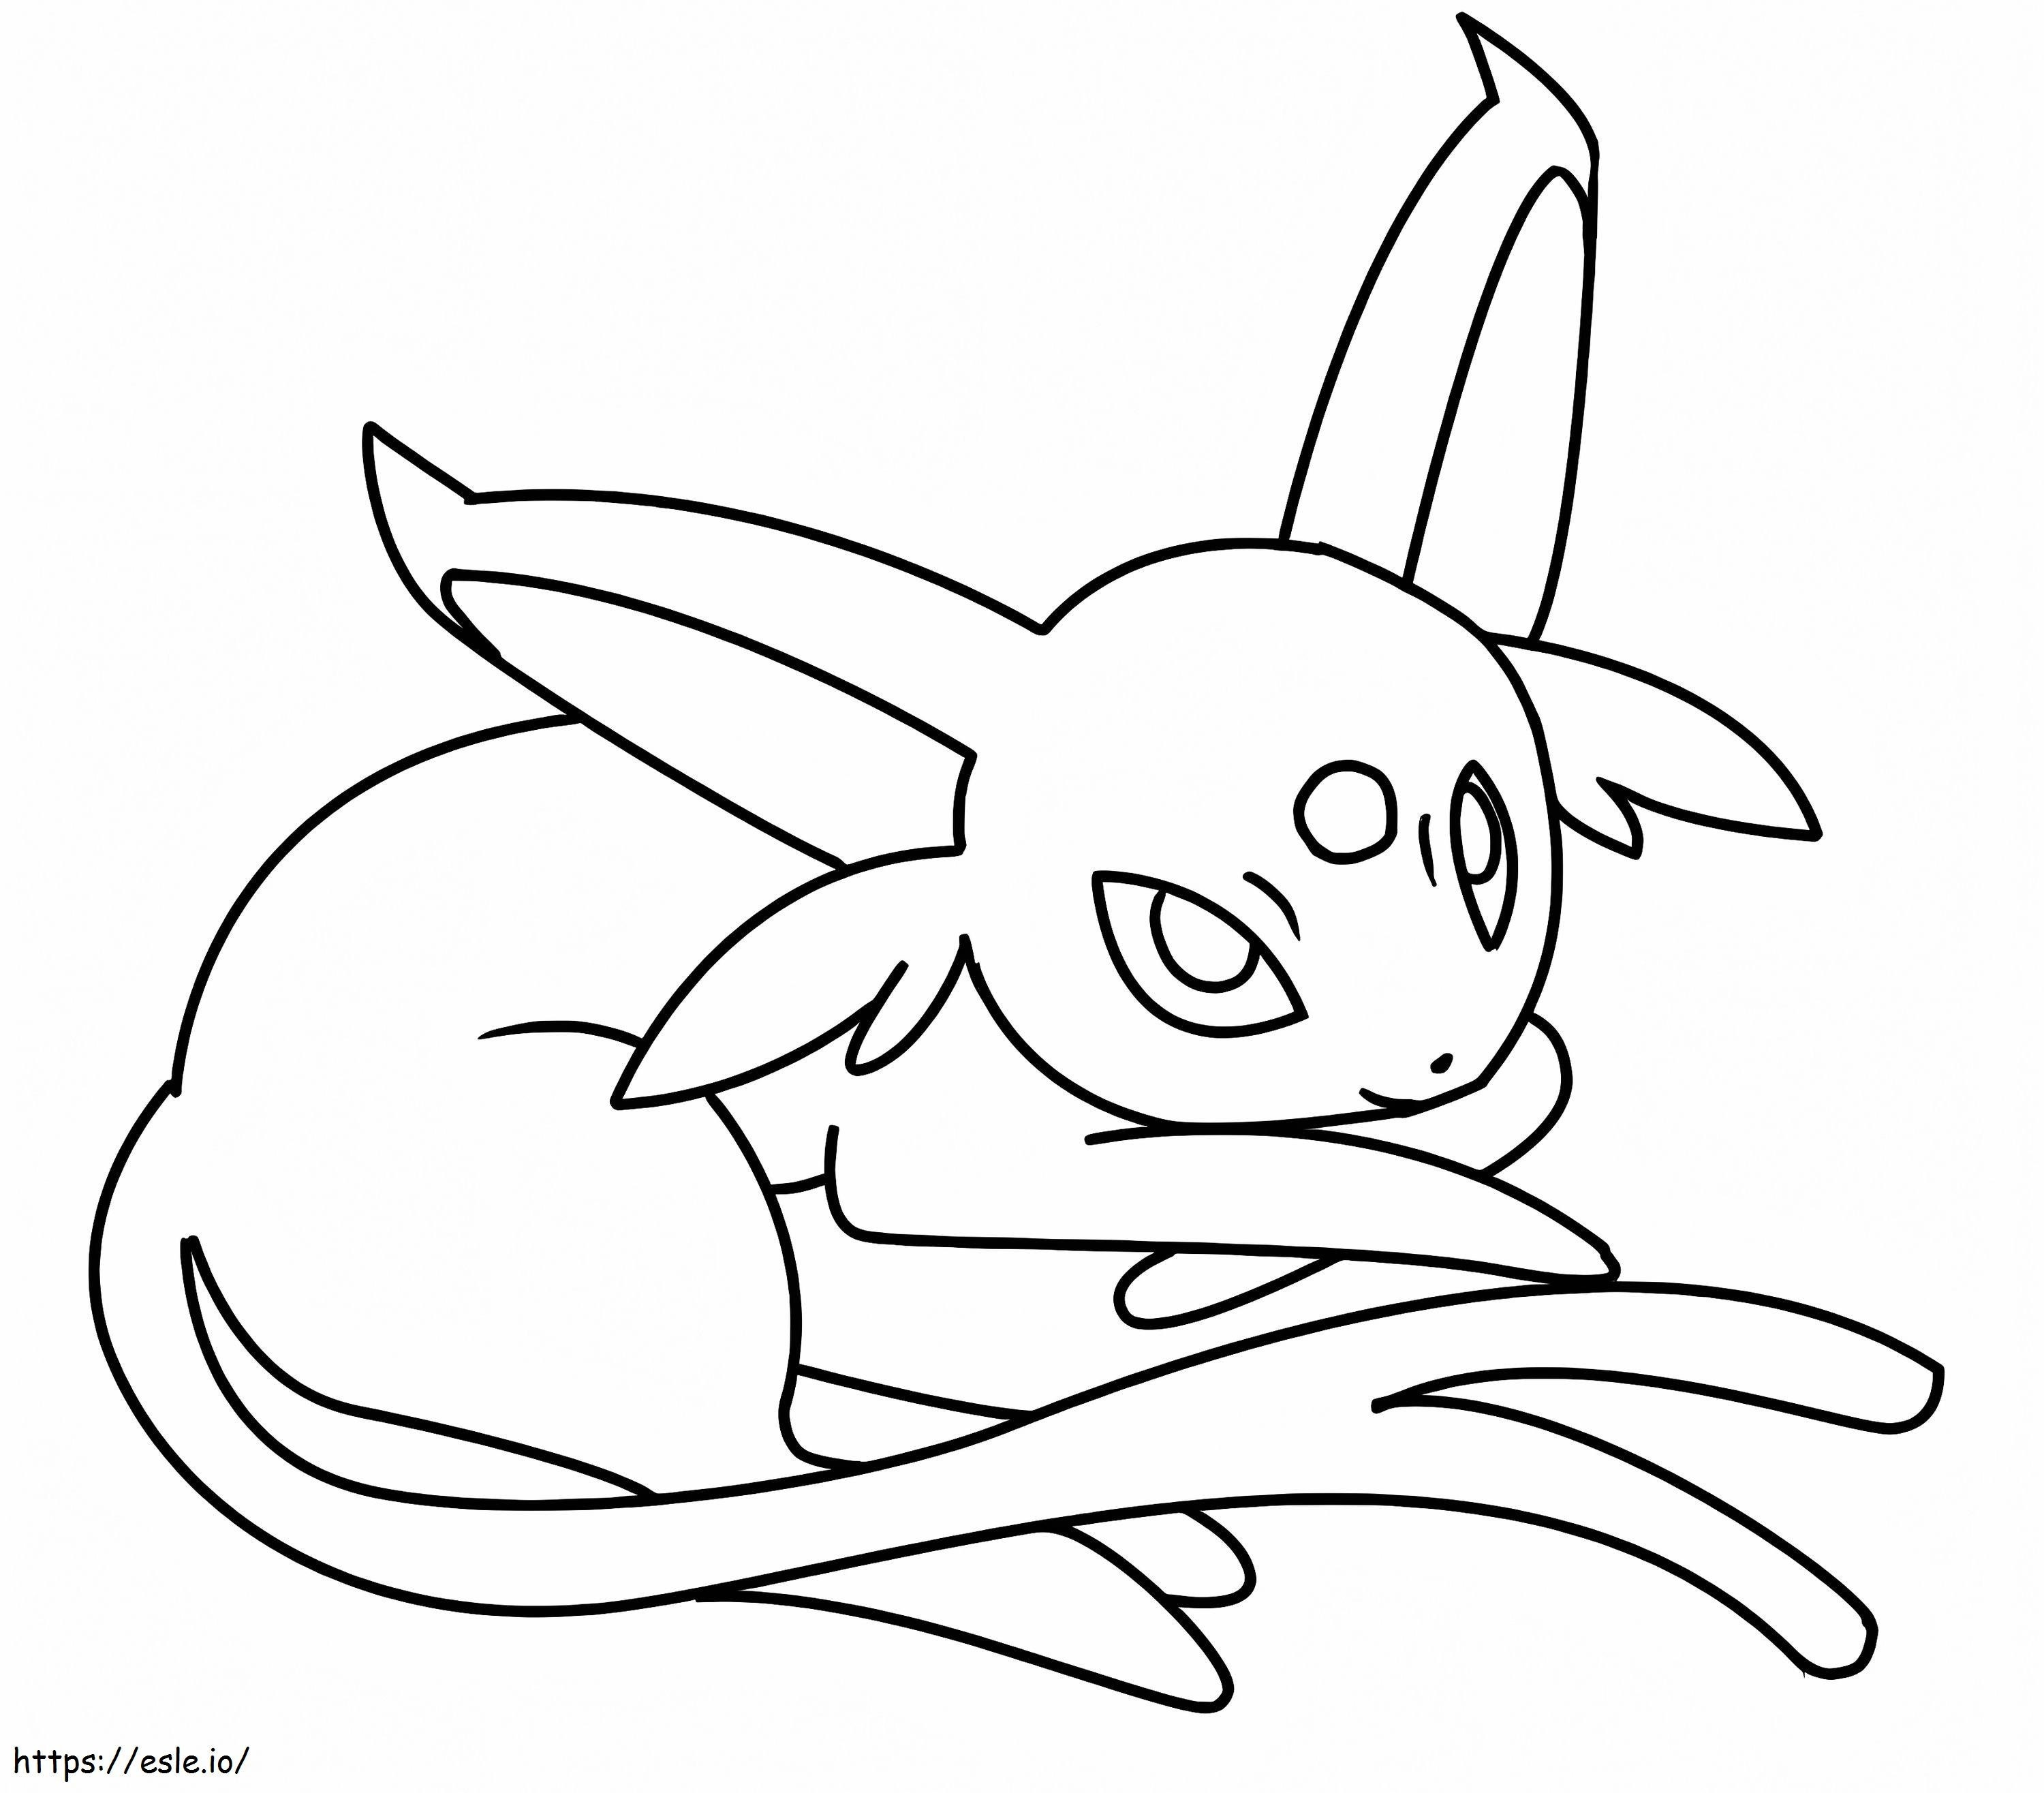 Espeon 5 coloring page